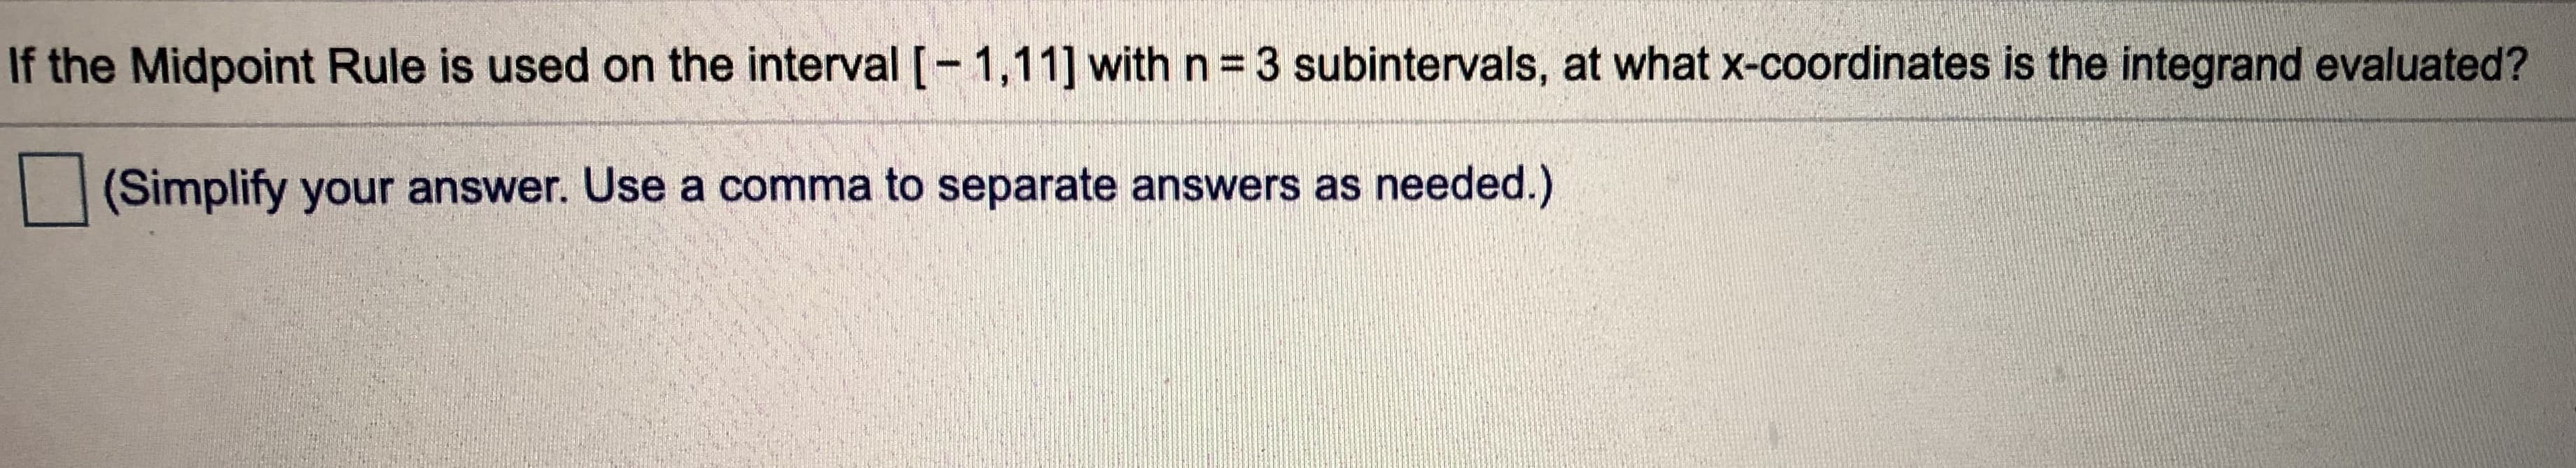 If the Midpoint Rule is used on the interval [-1,11] with n= 3 subintervals, at what x-coordinates is the integrand evaluated?
(Simplify your answer. Use a comma to separate answers as needed.)
